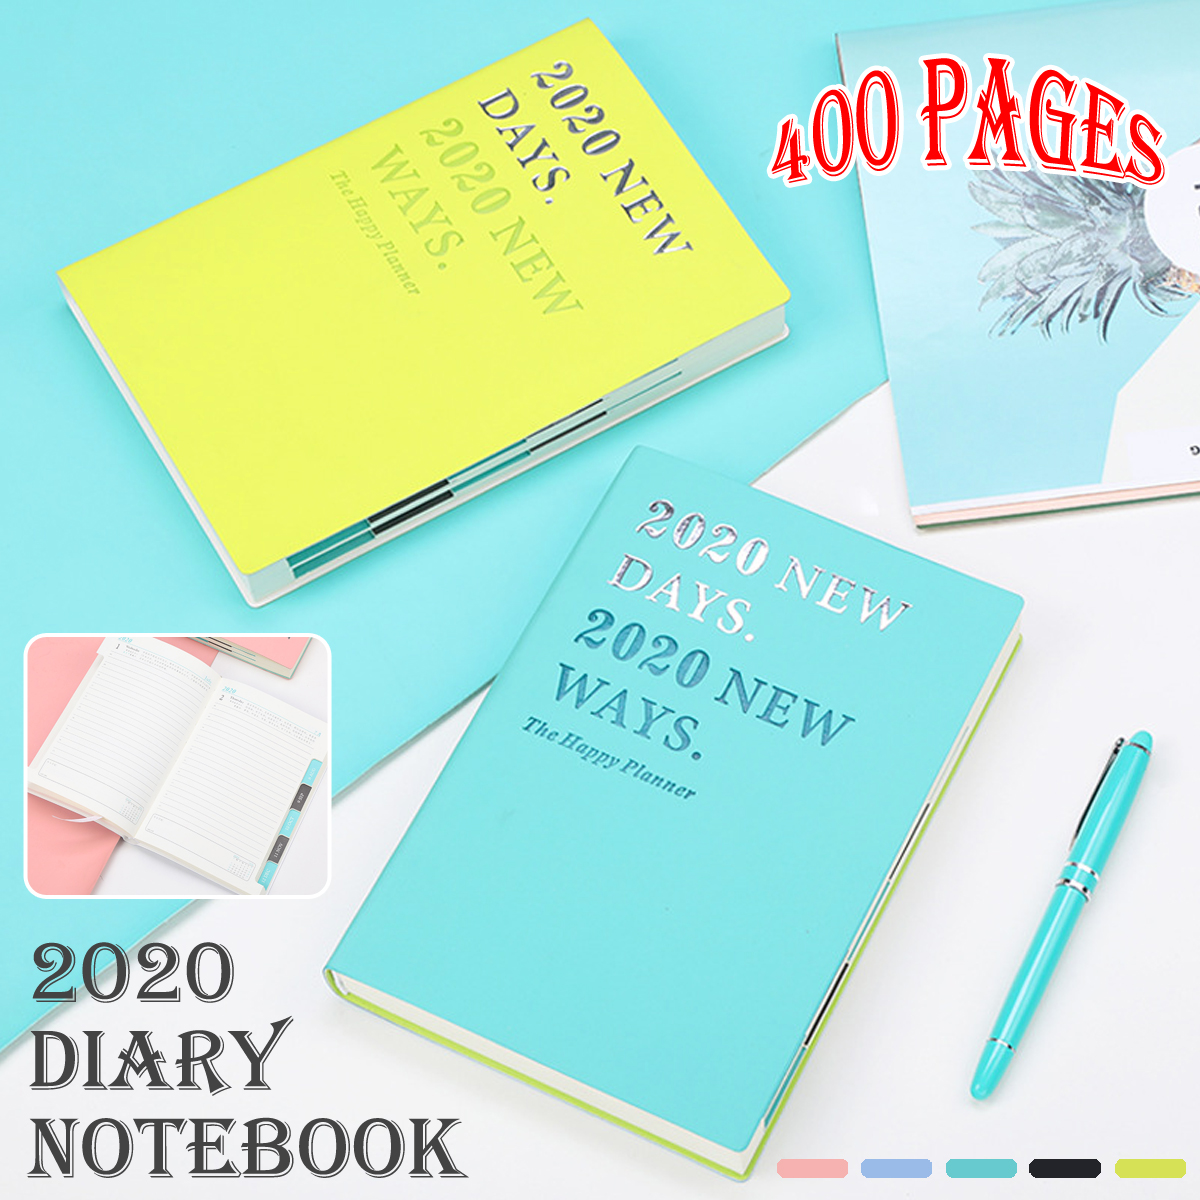 A5-Plan-Diary-Notebook-Journal-Weekly-Monthly-Notebook-Personal-Travel-Business-Notepad-Stationery-O-1740762-2